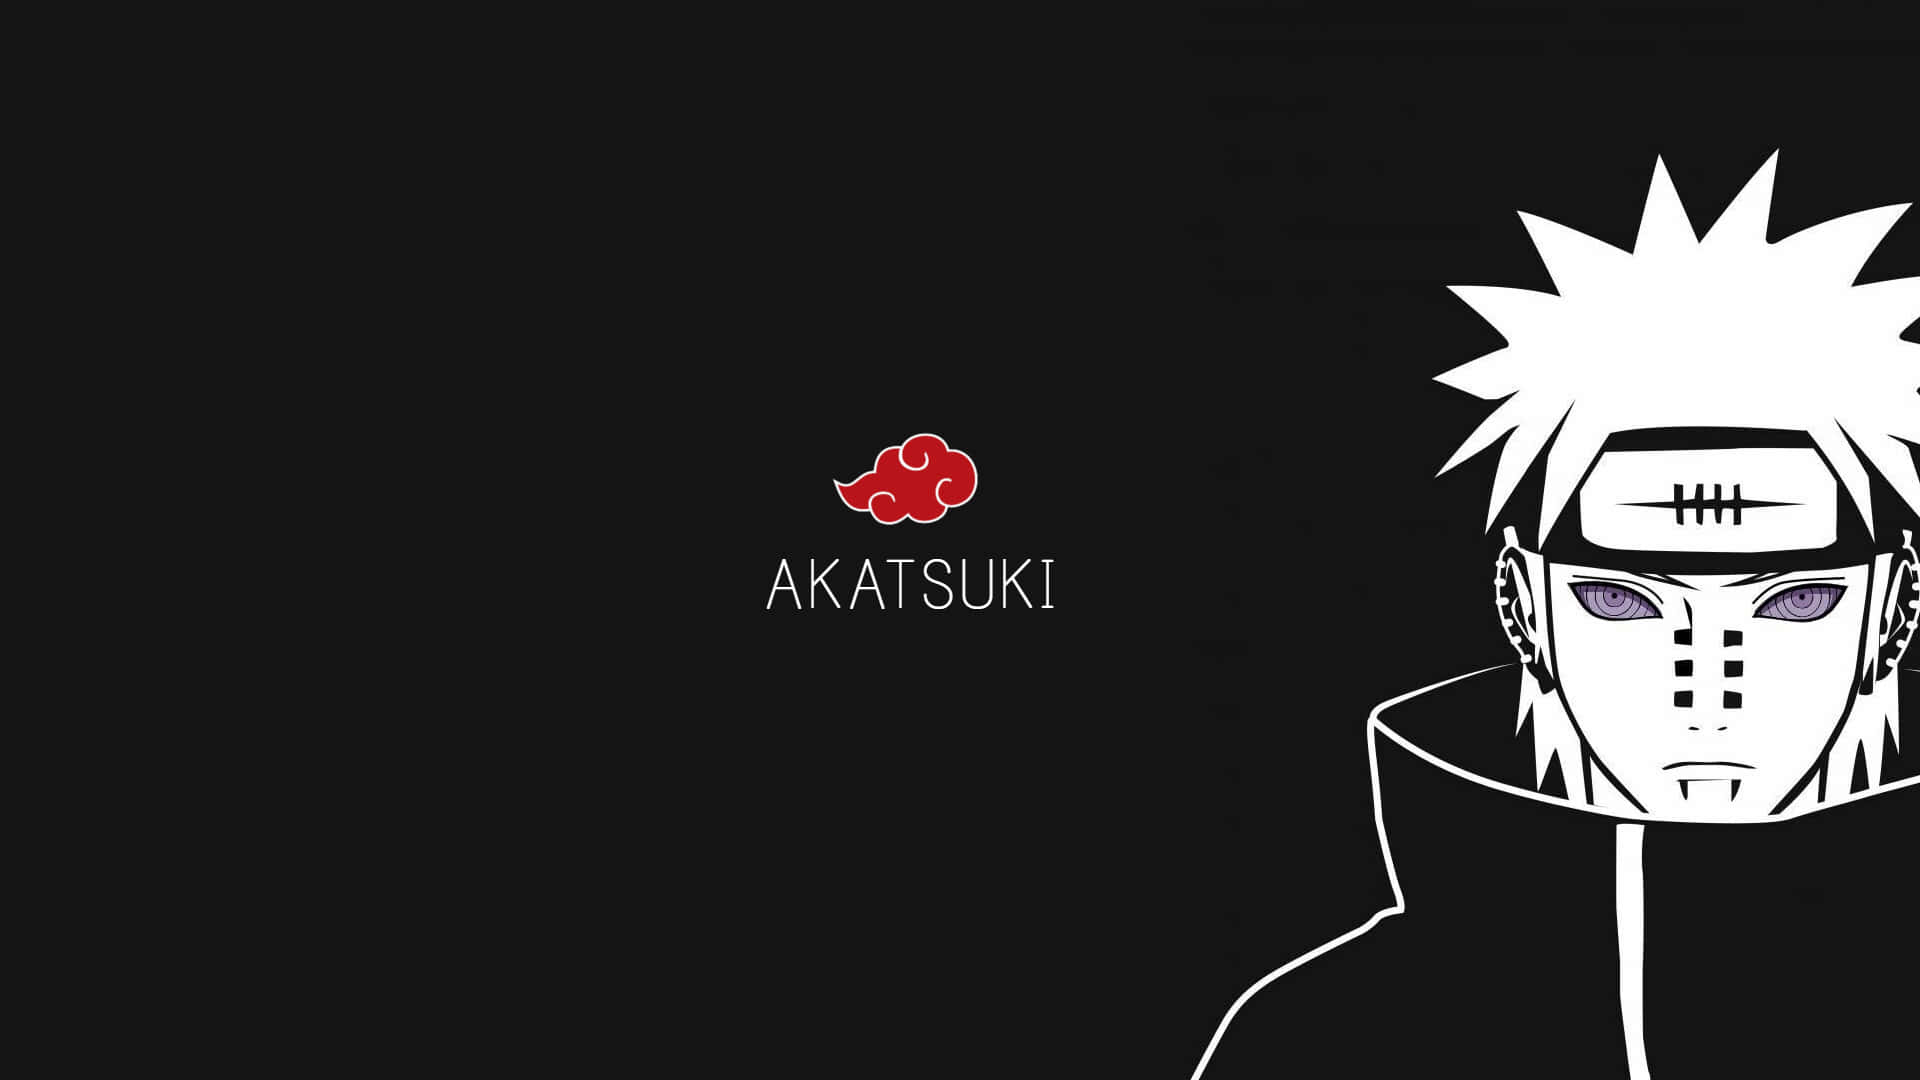 Join the Akatsuki and unleash your inner power.